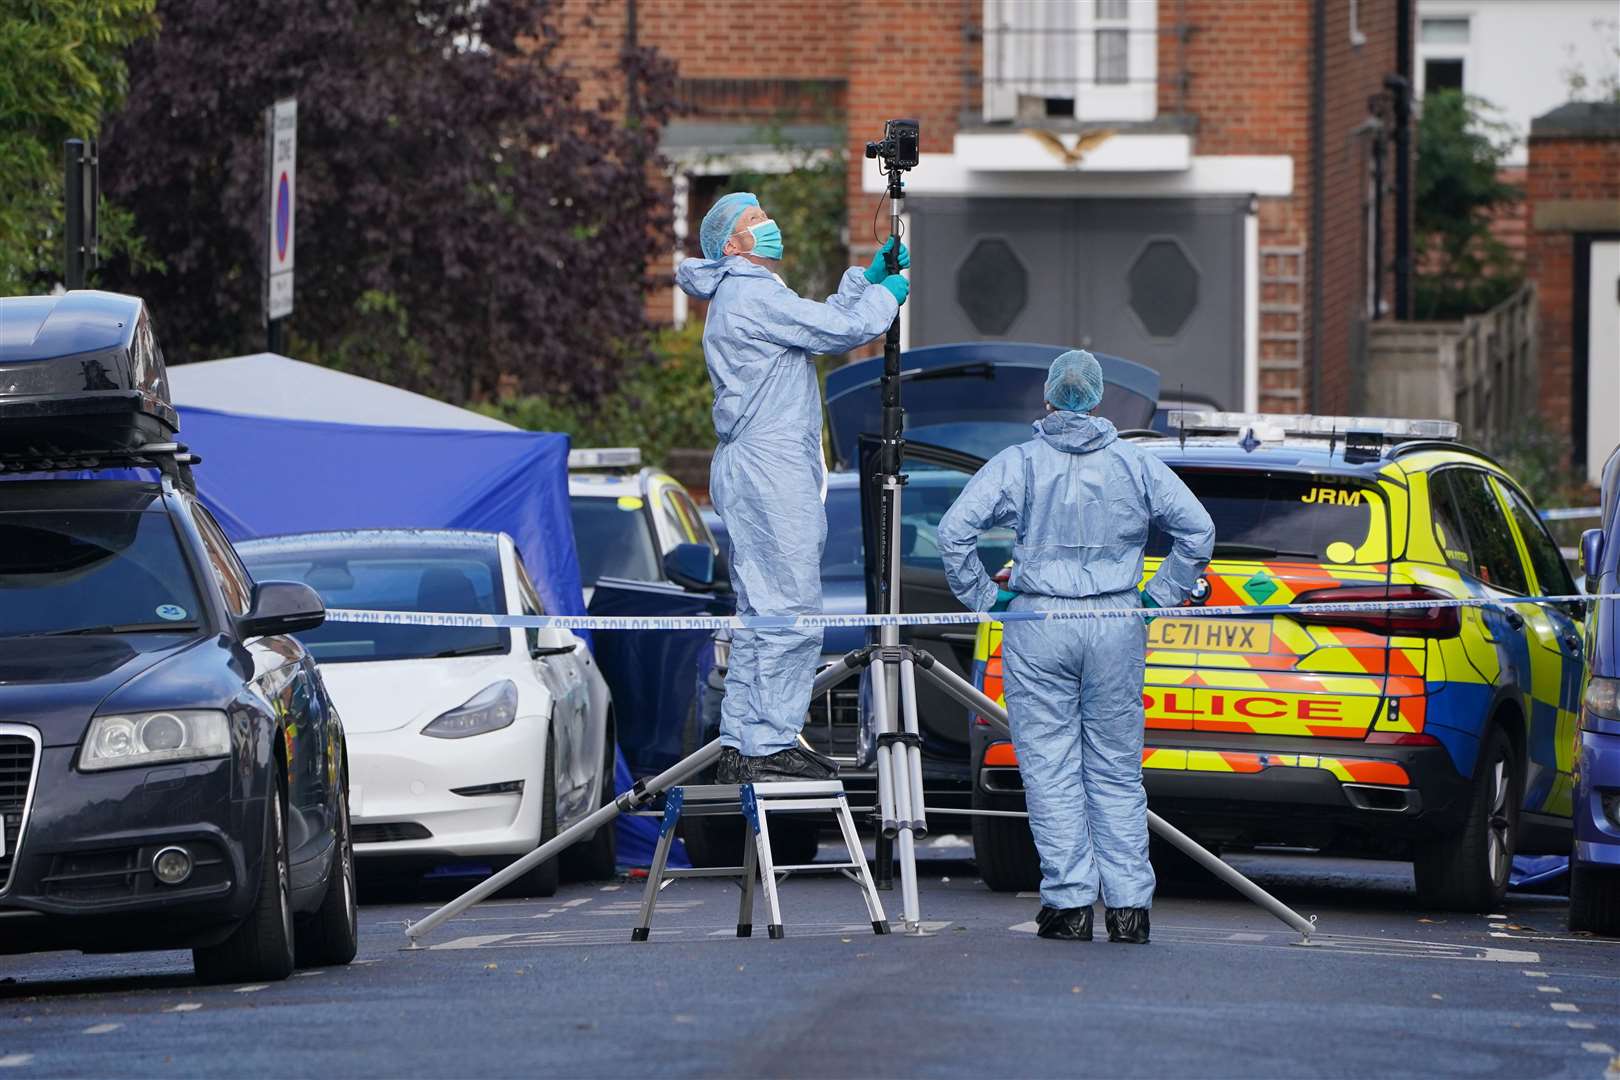 Forensic officers at the scene following the shooting (Jonathan Brady/PA)